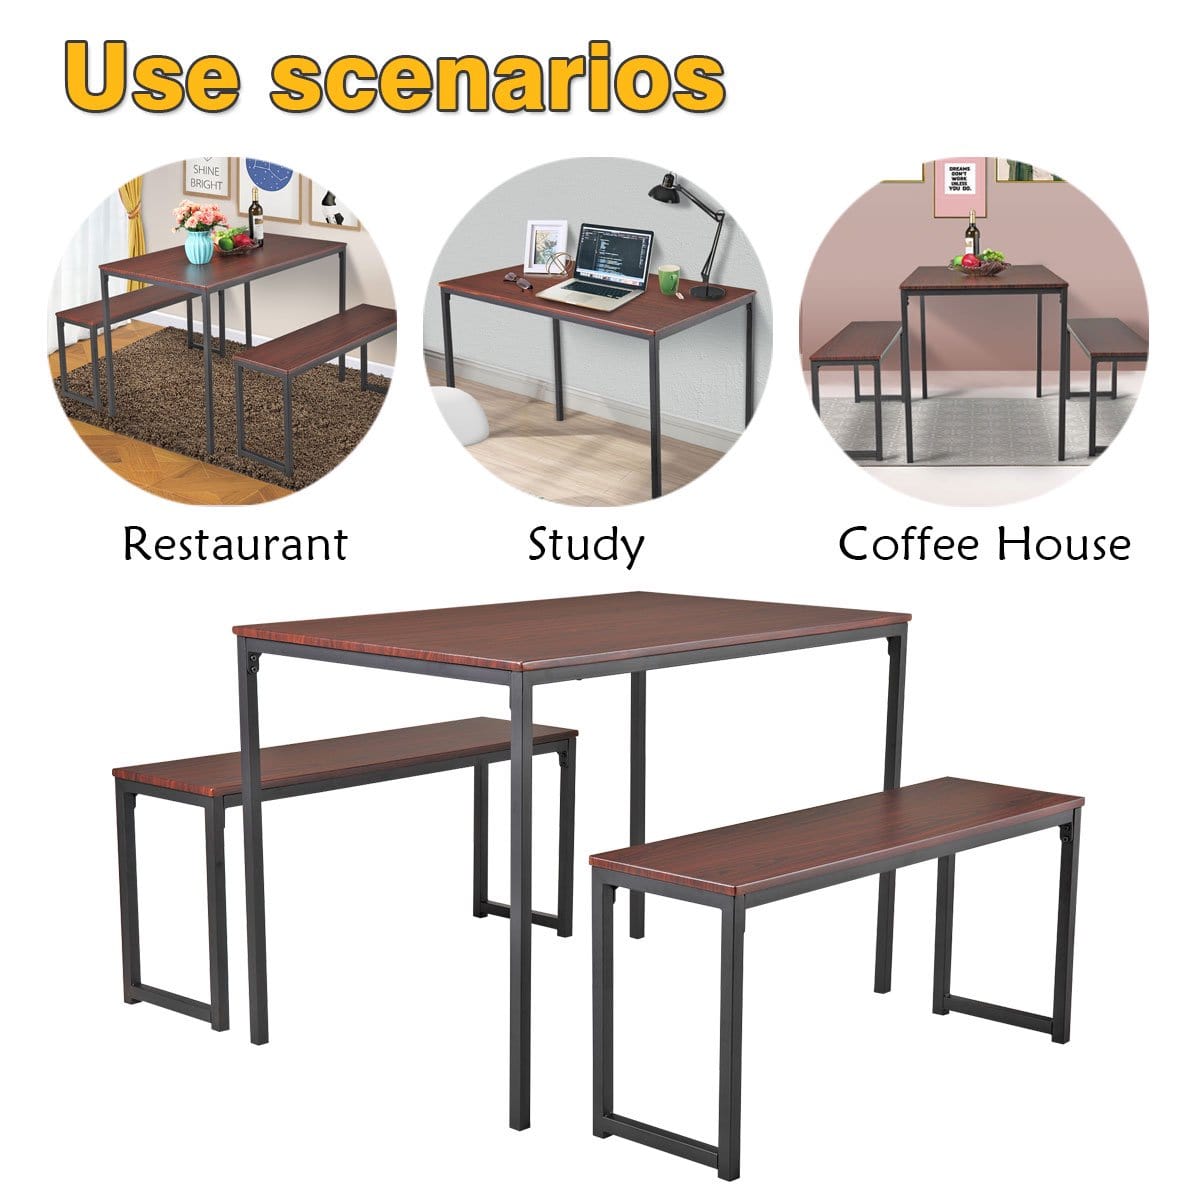 3-Piece Dining Table Set With 2 Benches Wood Table Top Dining Table with Metal Frame for Dining Room, Pub and Bistro, Brown